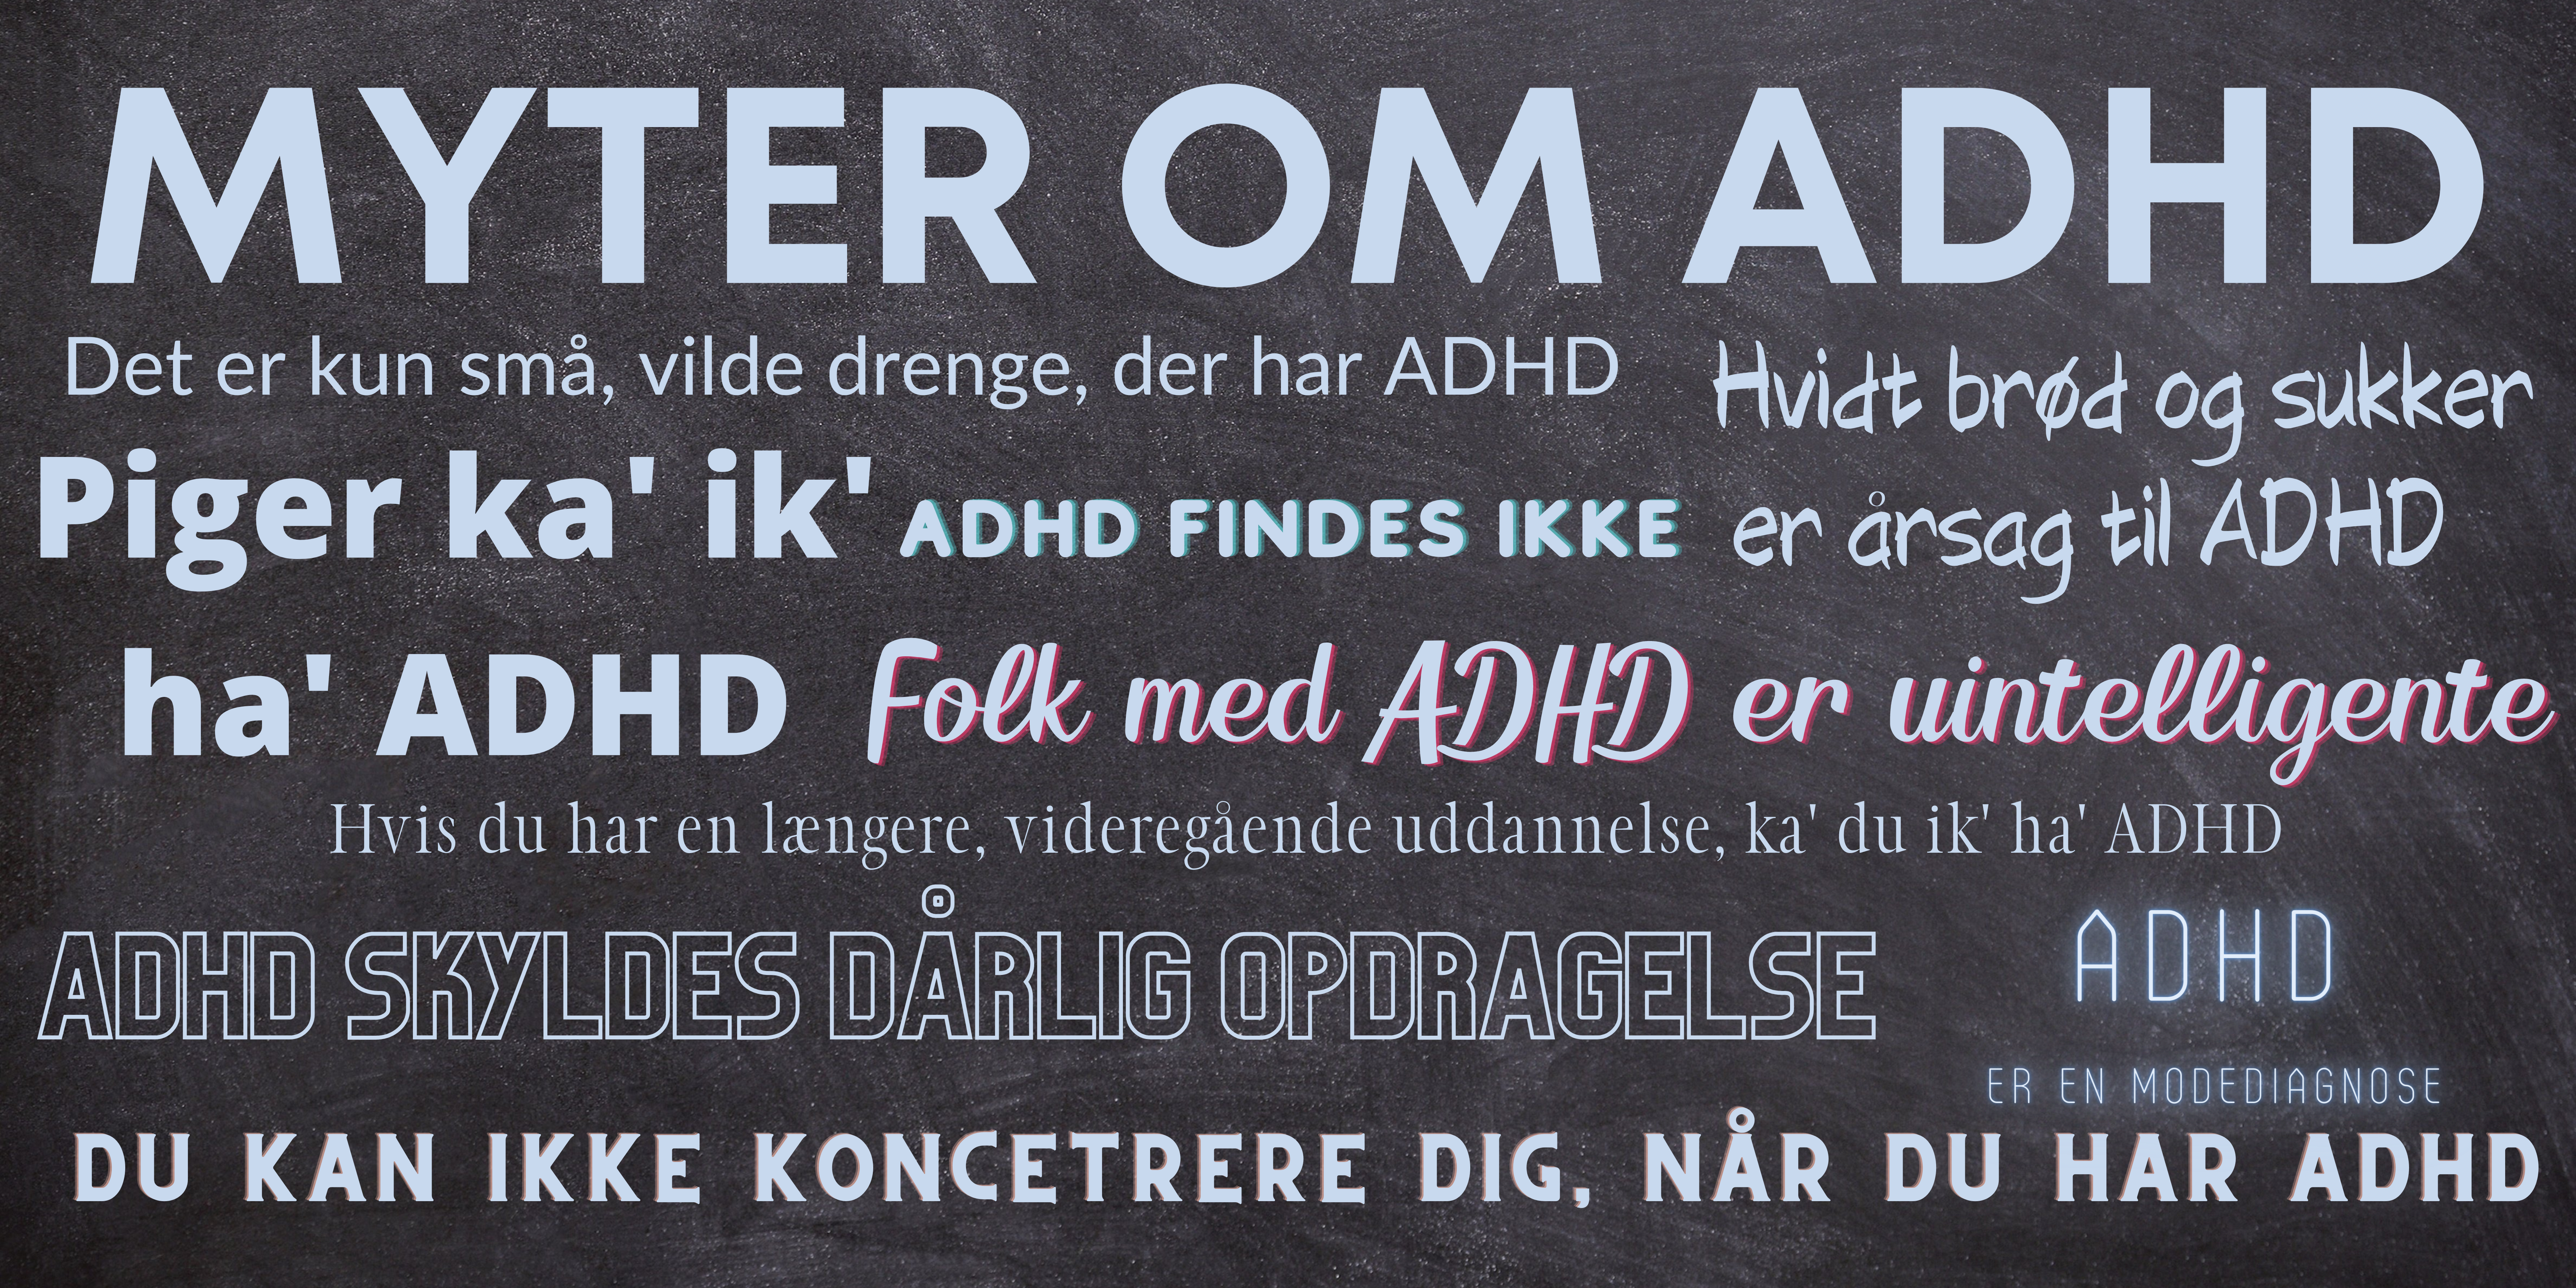 ADHD fordomme myter